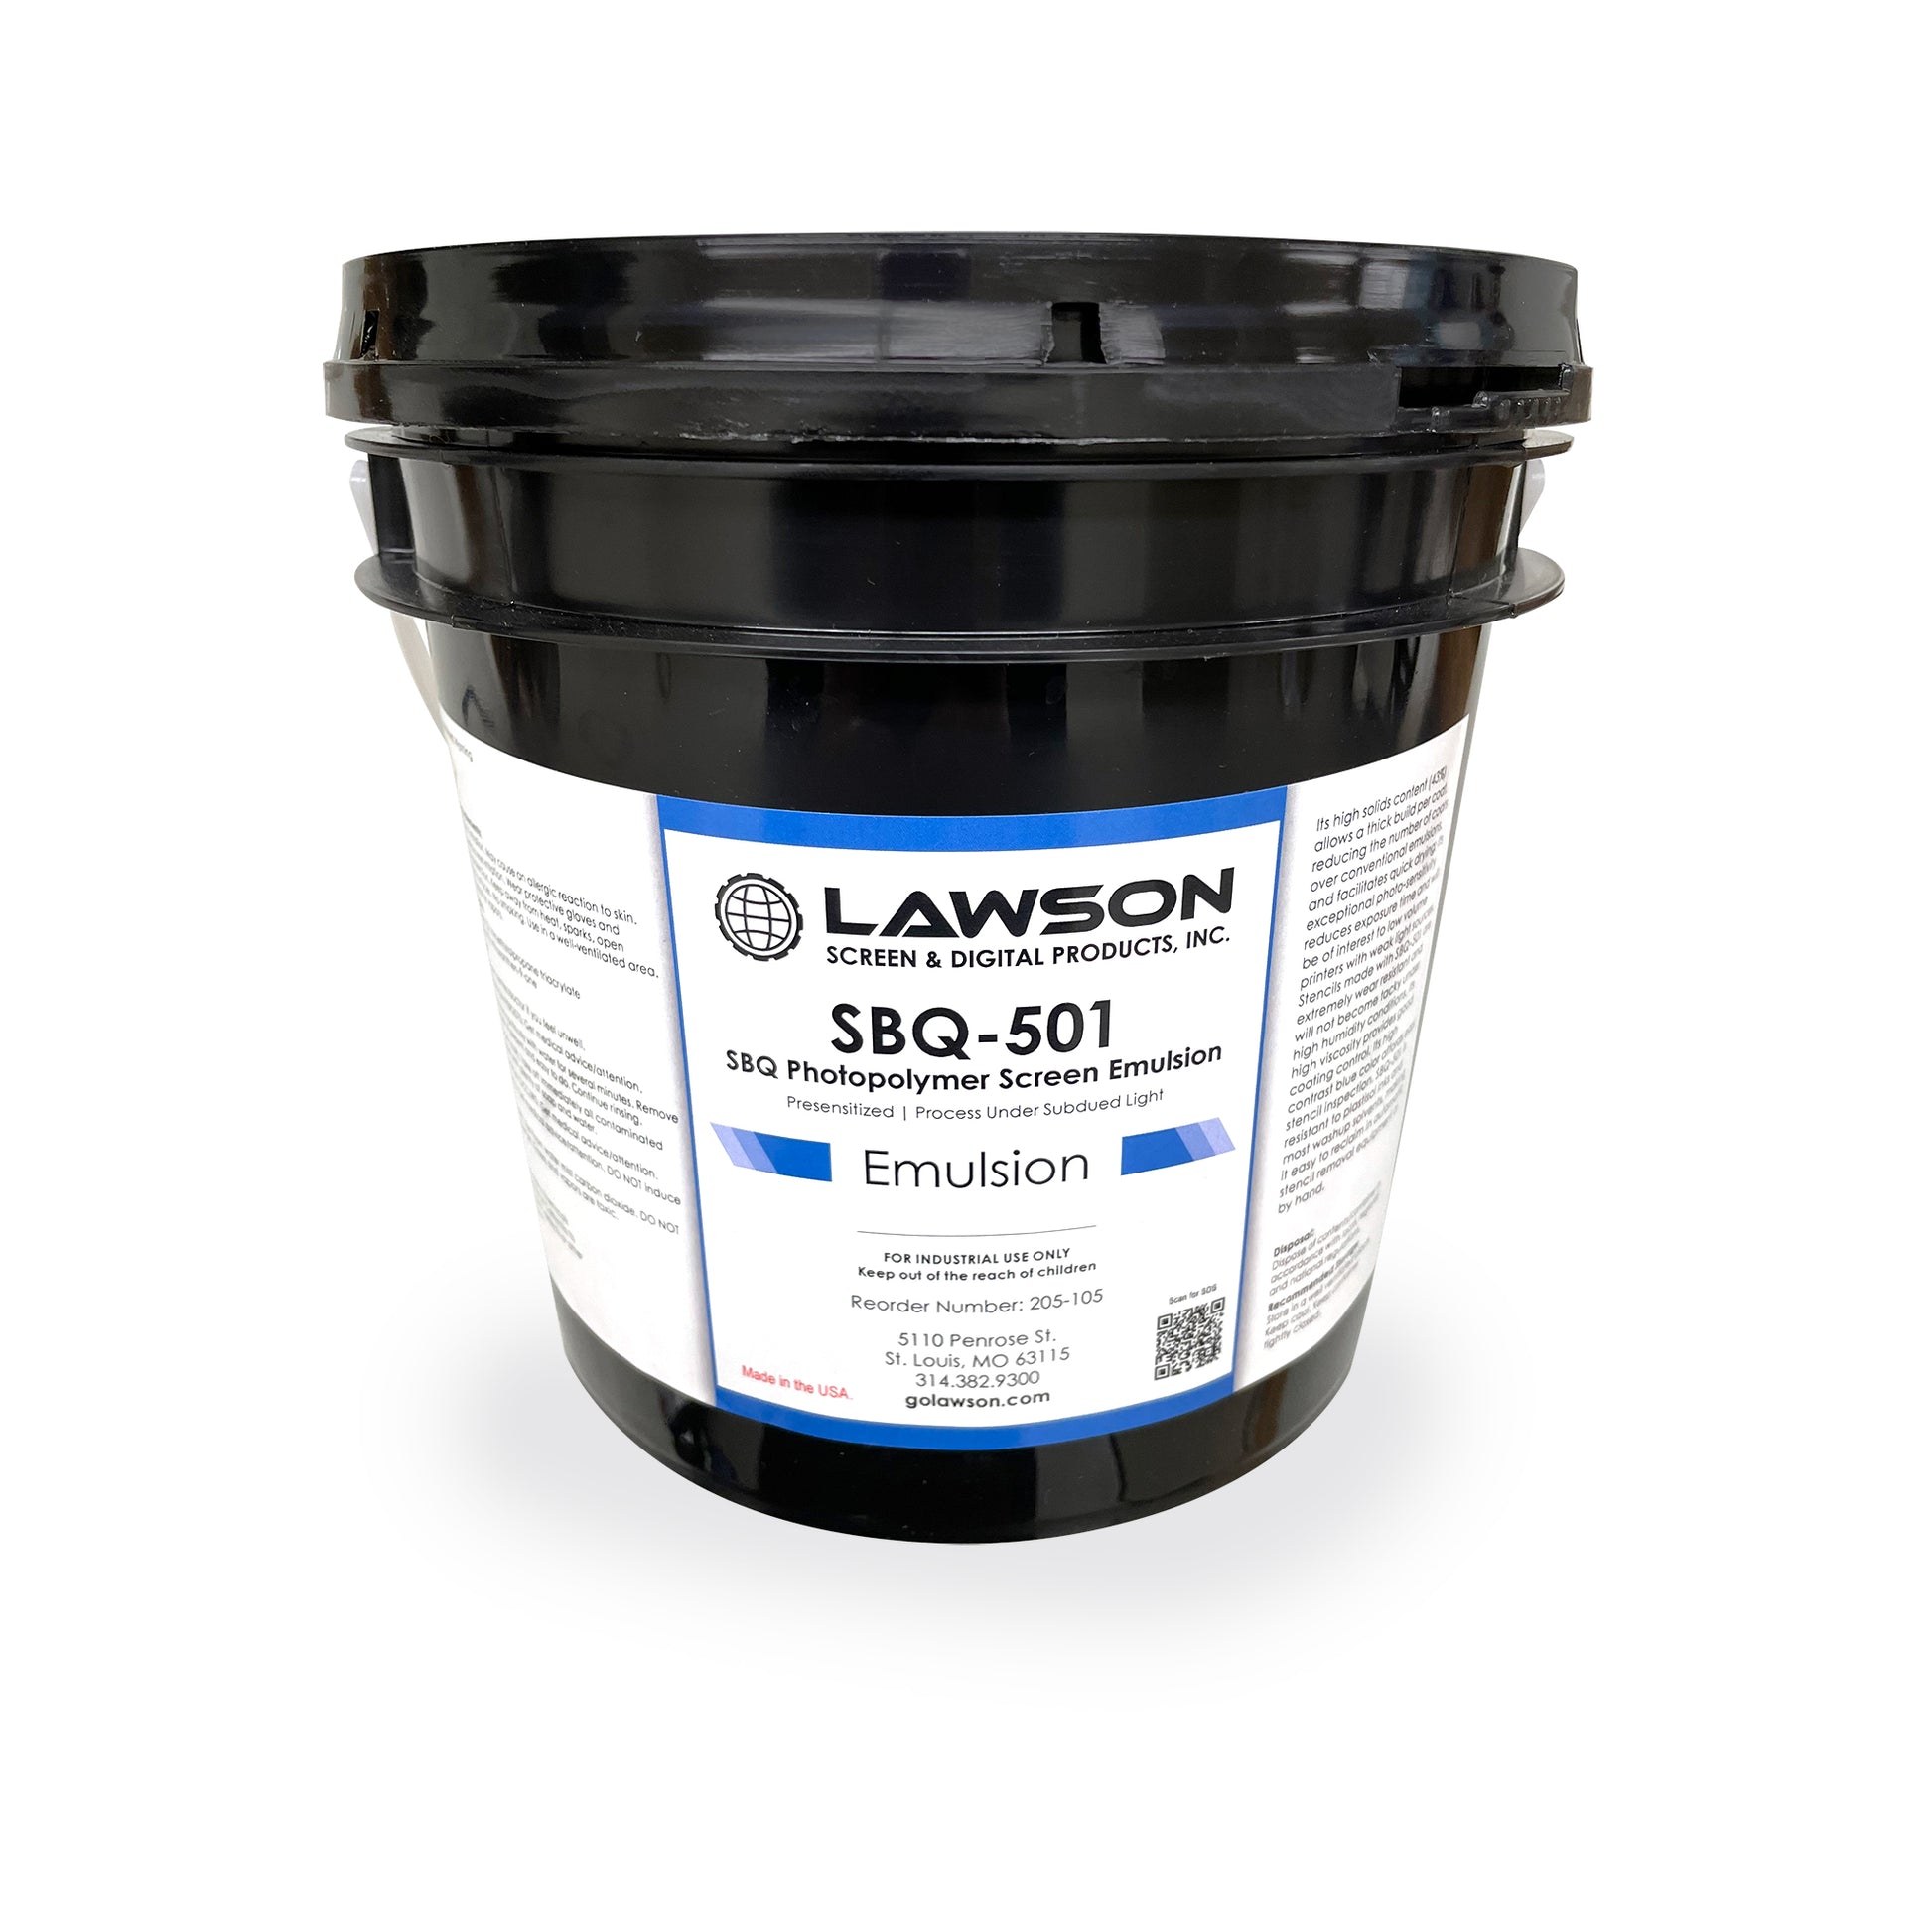 Types of emulsions used in screen printing 